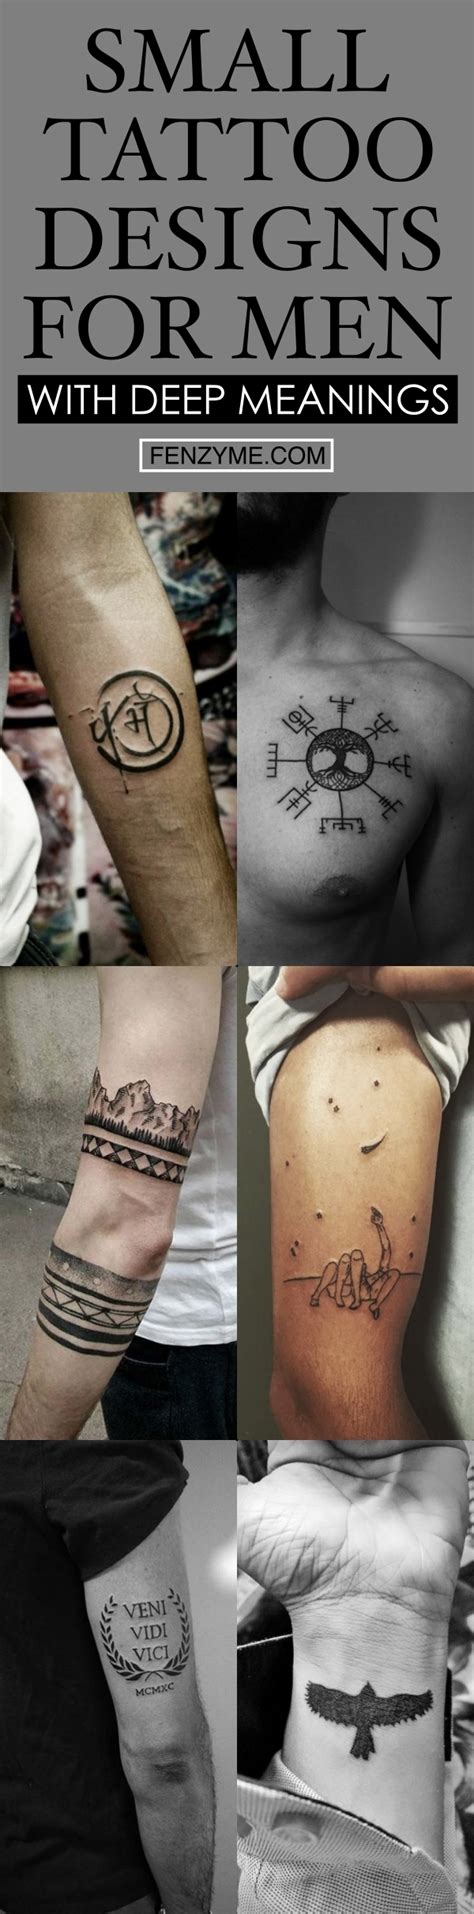 Small Tattoos For Men With Meaning Small Tattoo Designs For Men With